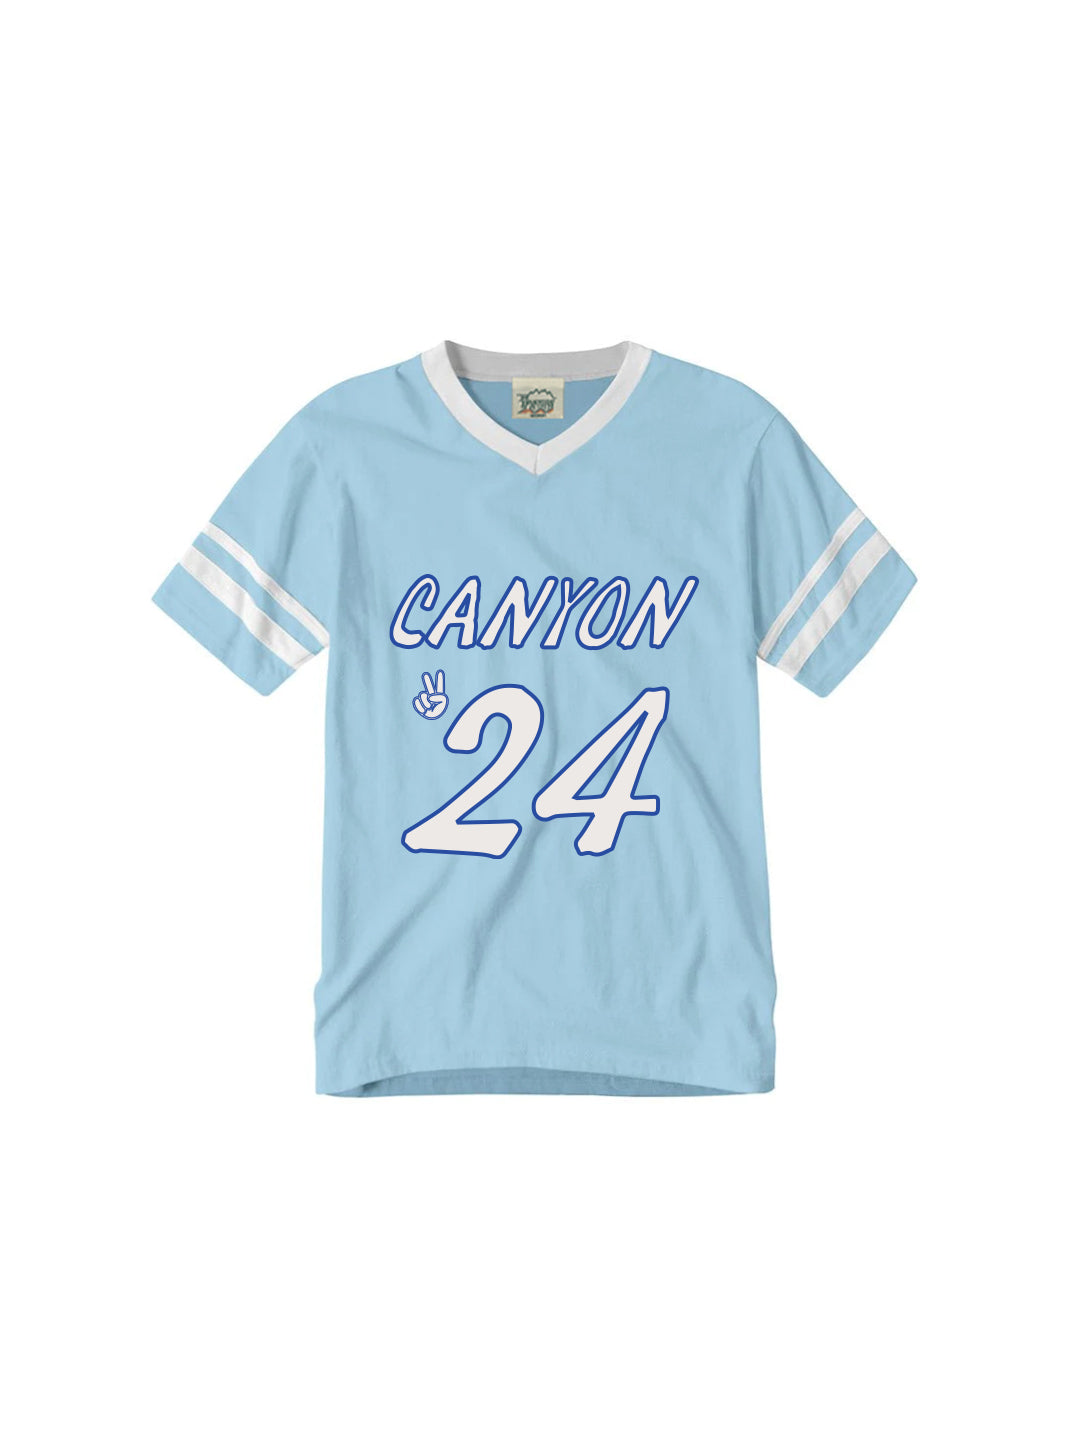 Canyon '24 Adult Track Tee in Dusty Blue